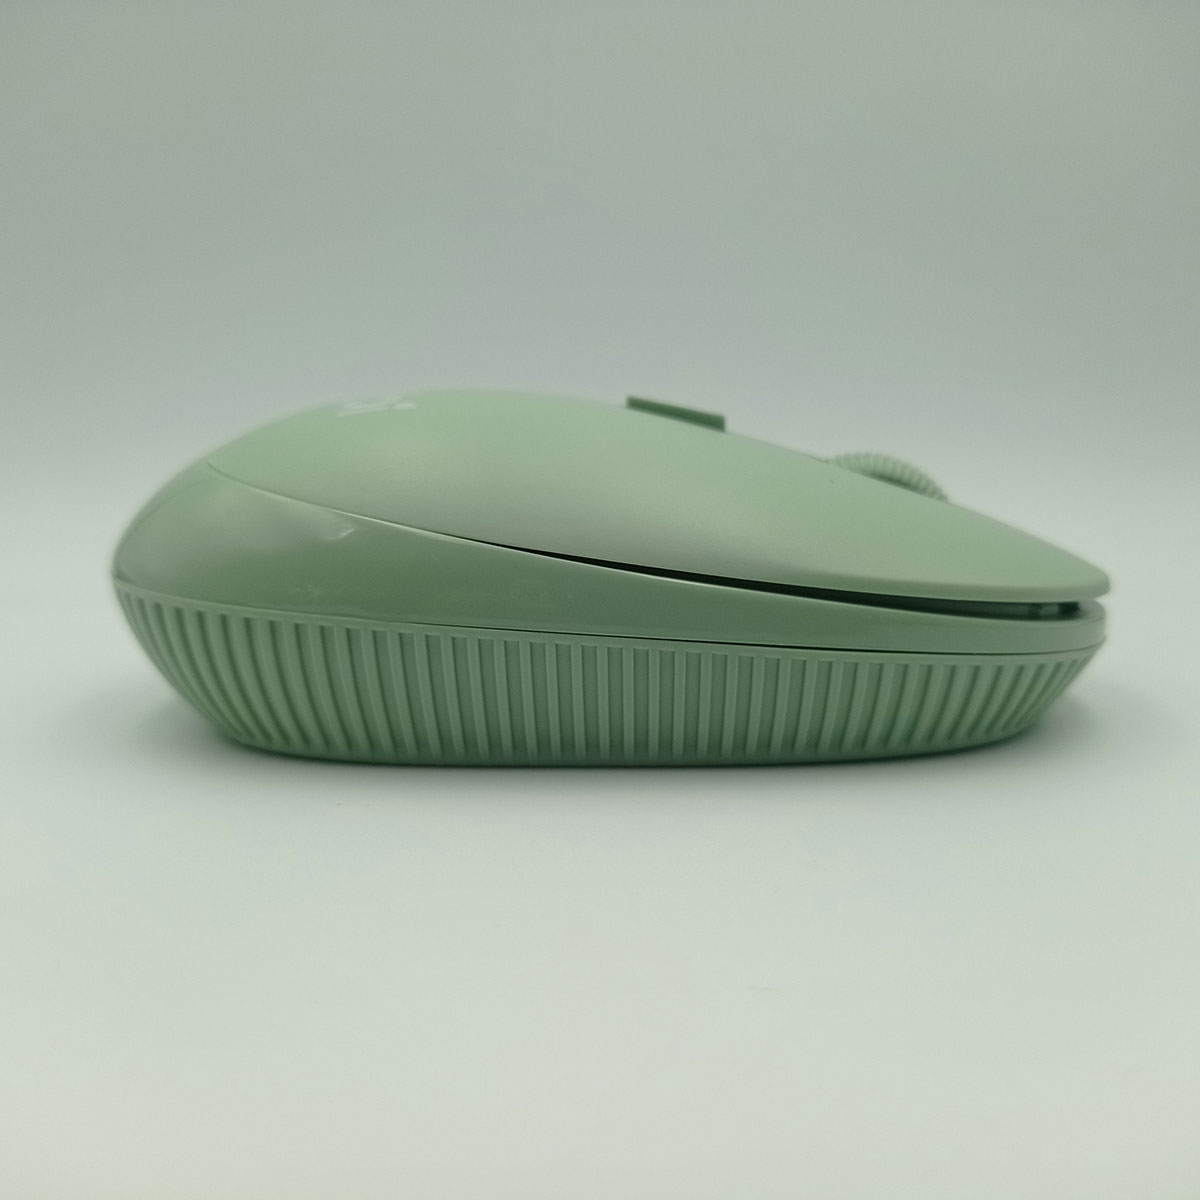 nm71-wireless-mouse-green-04